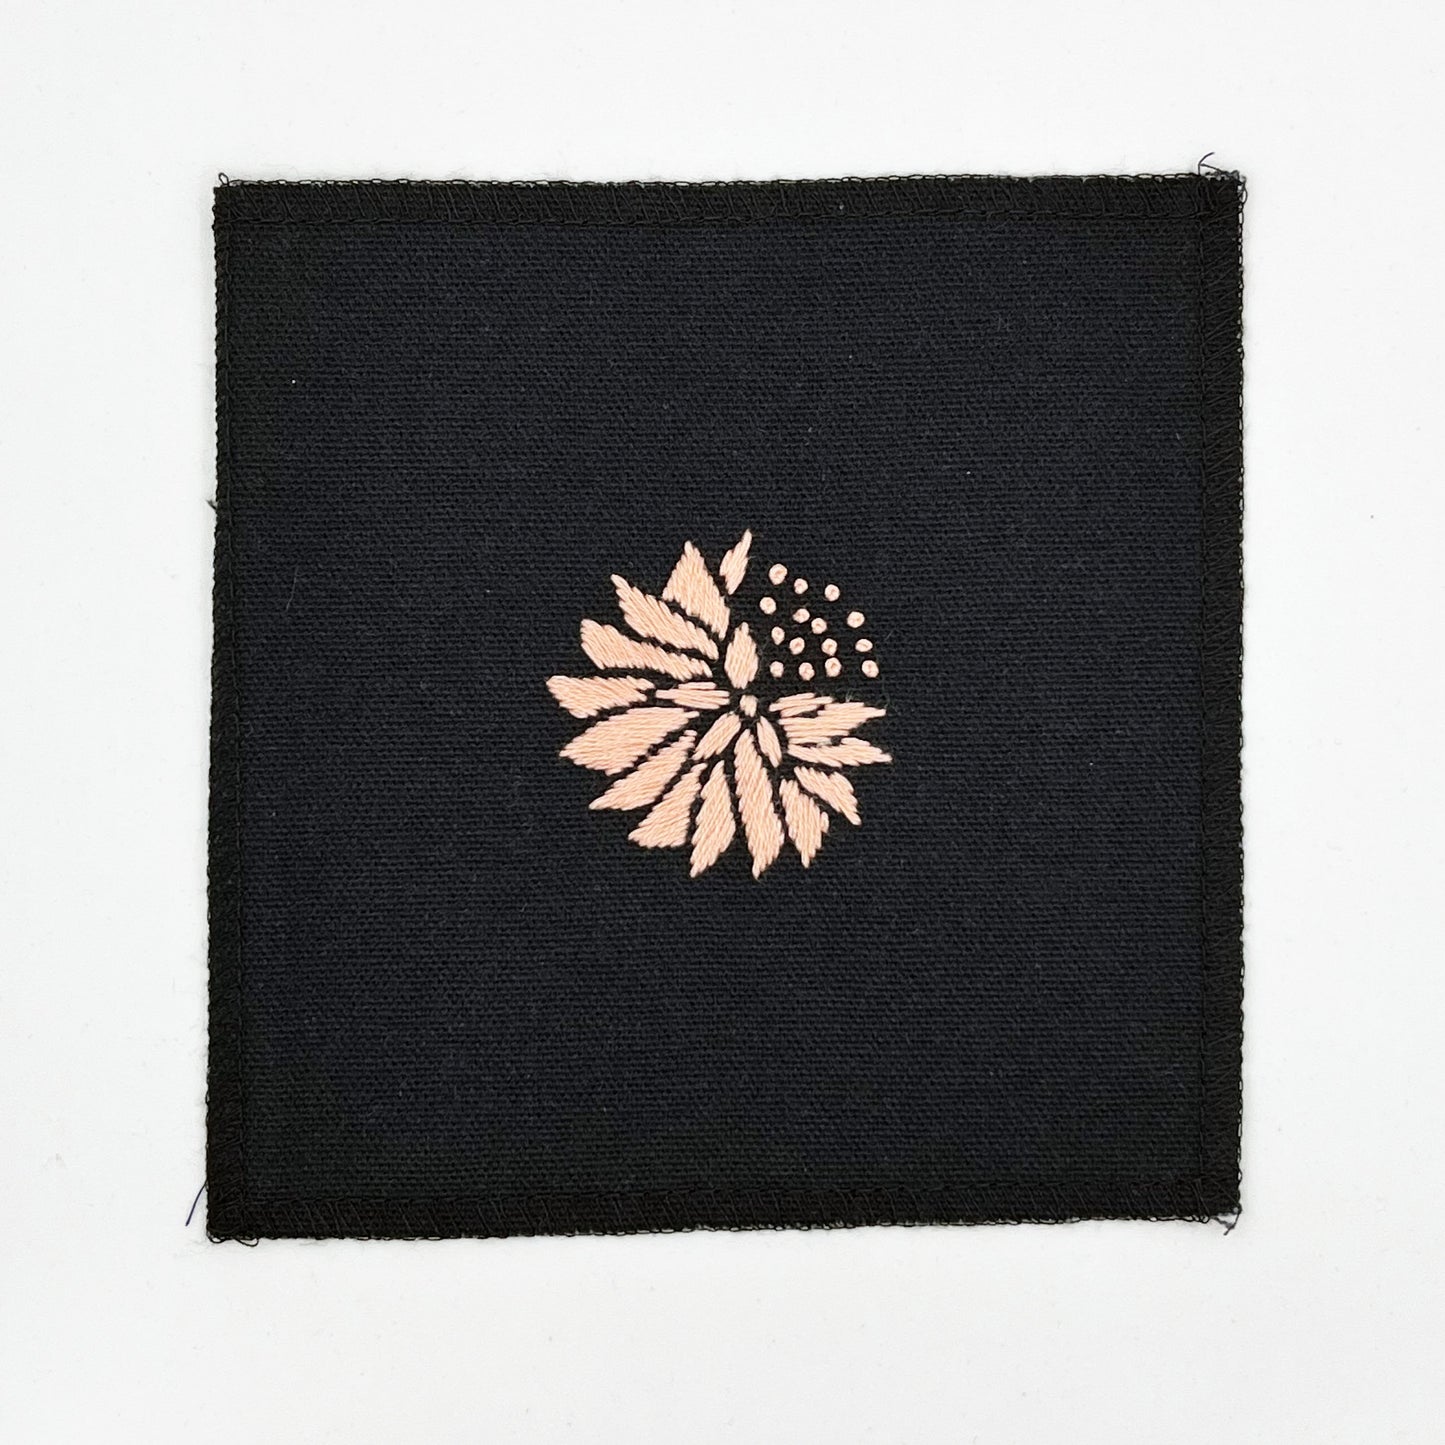 a square patch in black fabric, hand embroidered with a peach colored abstract dandelion made mostly of petals, with a quarter of them replaced with french knots, with overlocked edges, on a white background